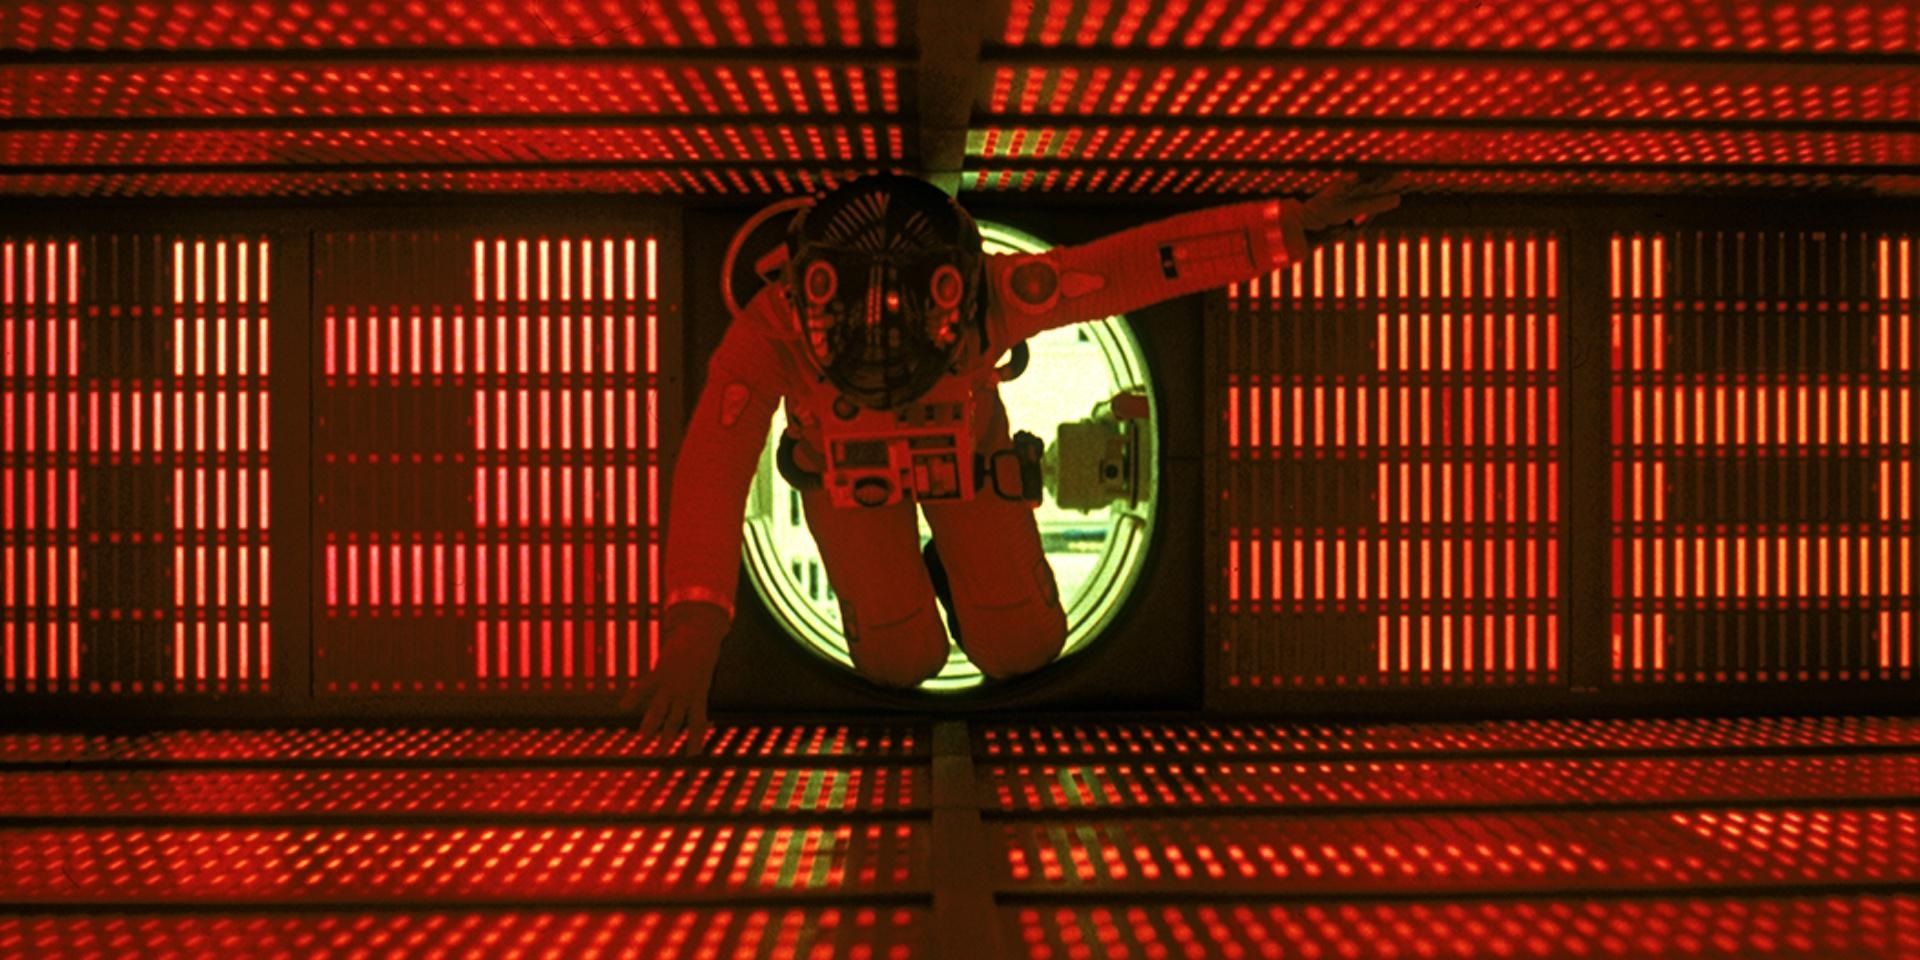 Dave Bowman dismantling HAL in 2001 A Space Odyssey